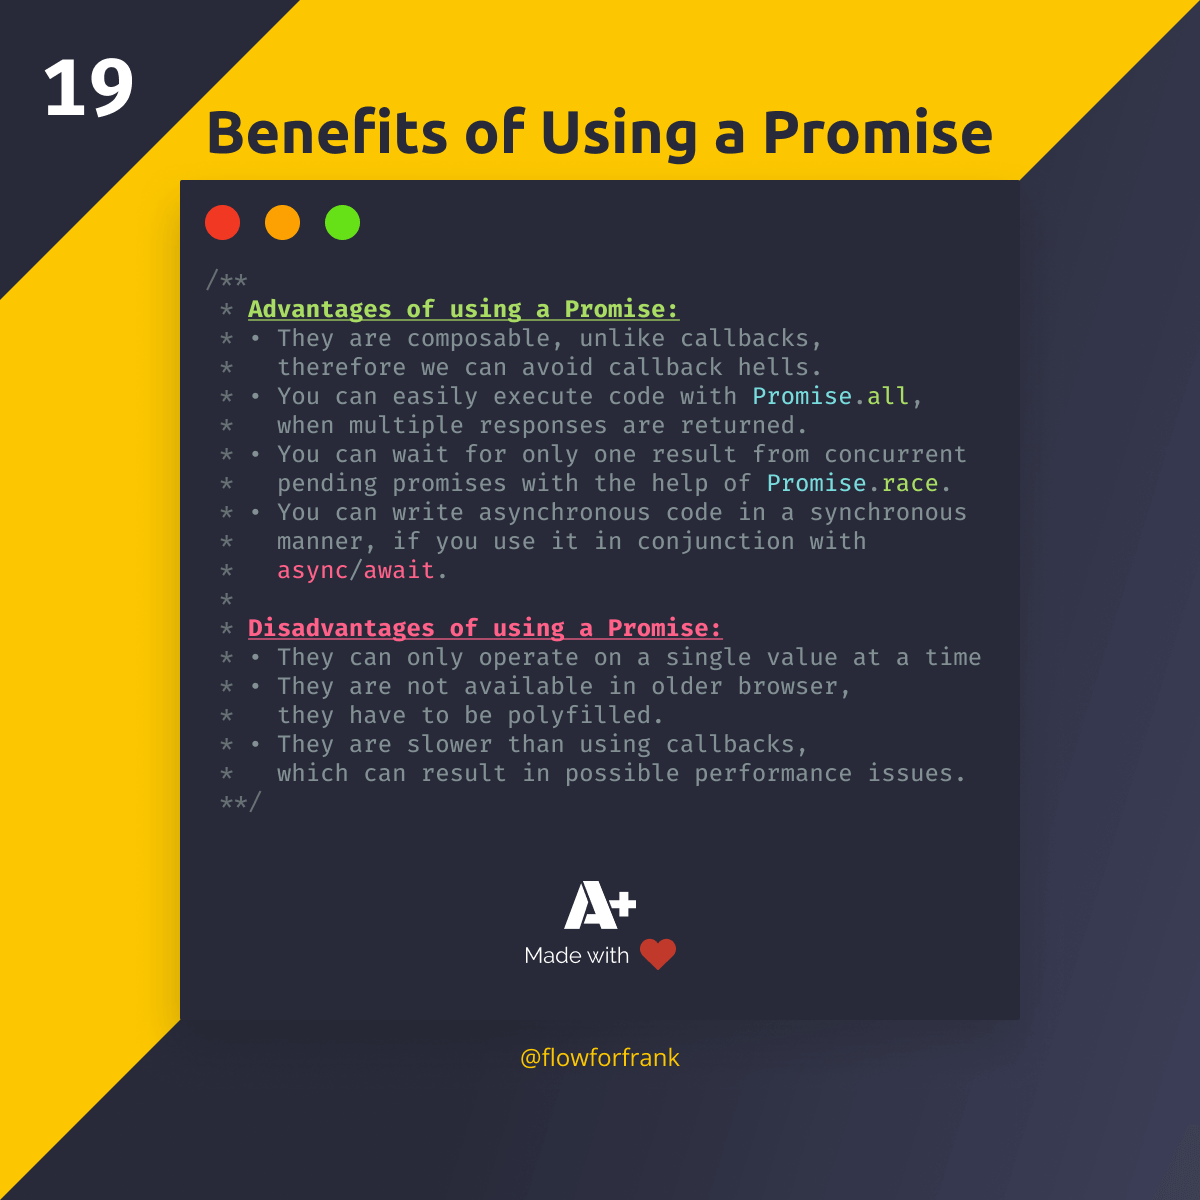 What Are the Benefits of Using Promises?